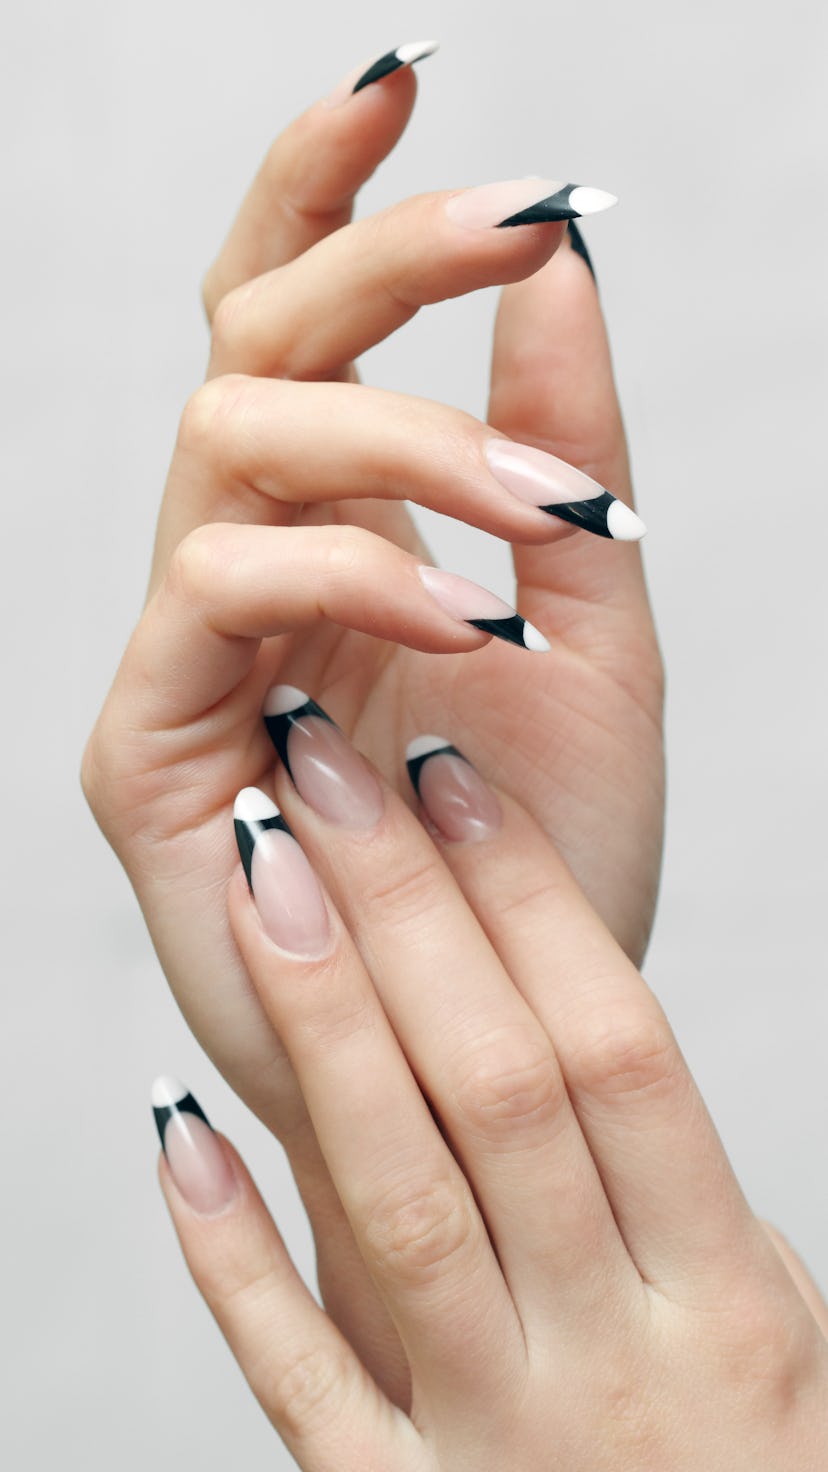 Fall 2022 nail trends include contrasting french manicures, one of fall 2022's new nail art trends.